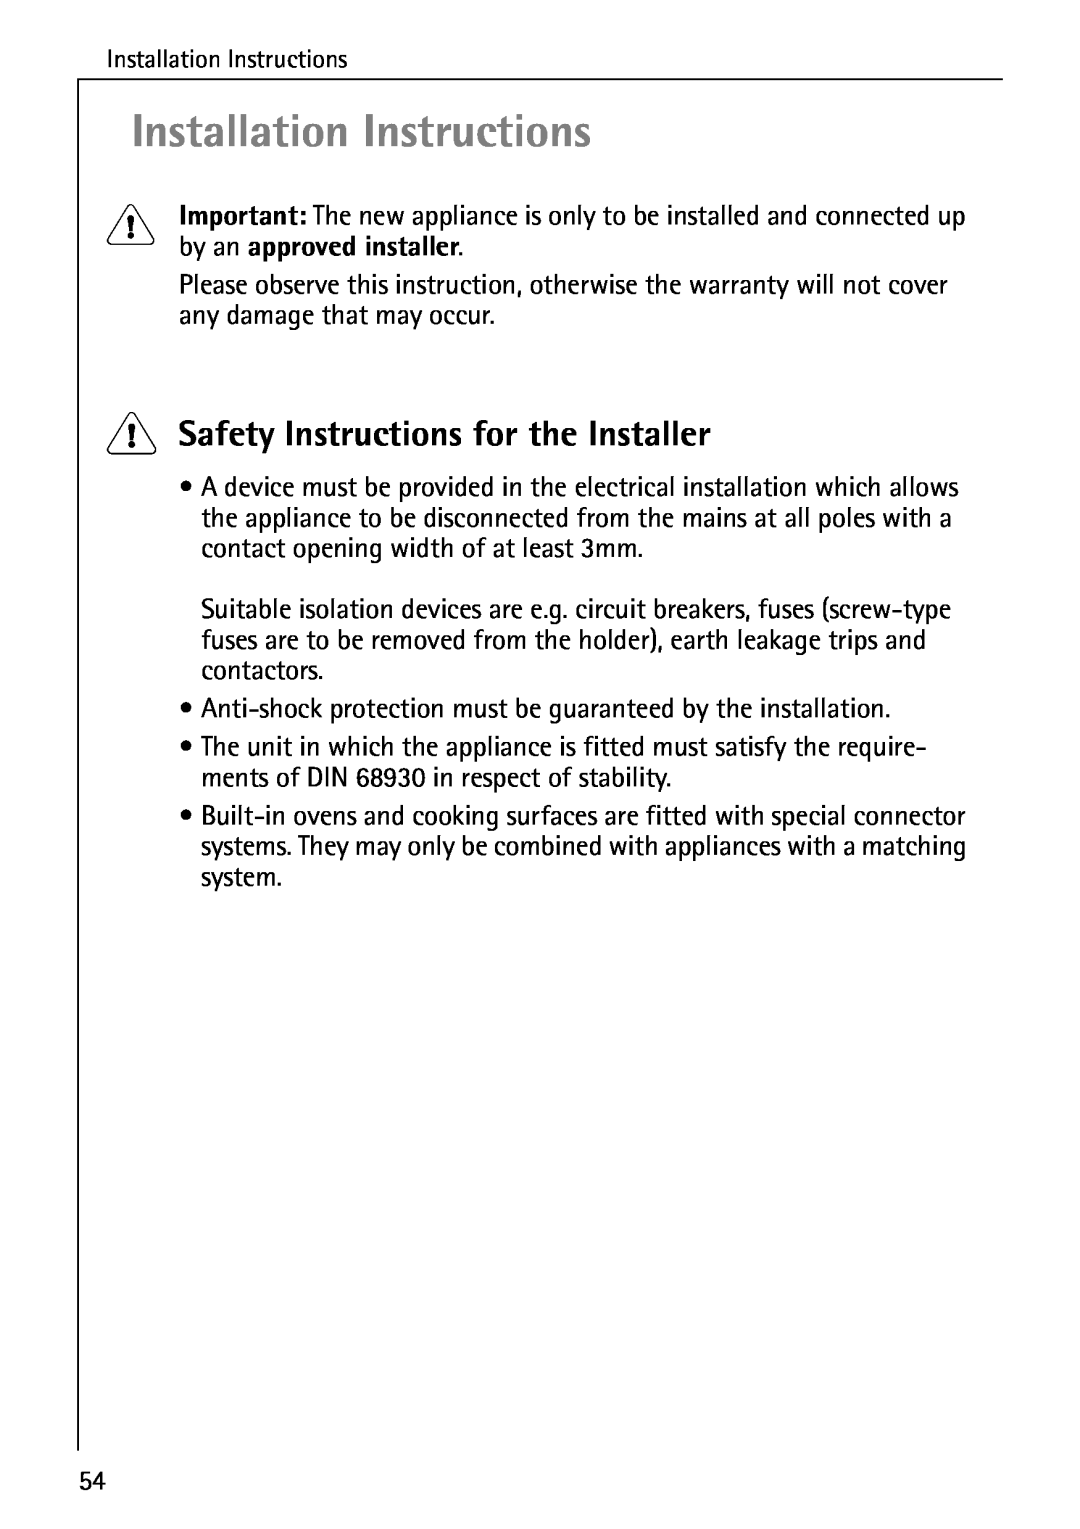 AEG E4100-1 manual Installation Instructions, 1Safety Instructions for the Installer, by an approved installer 